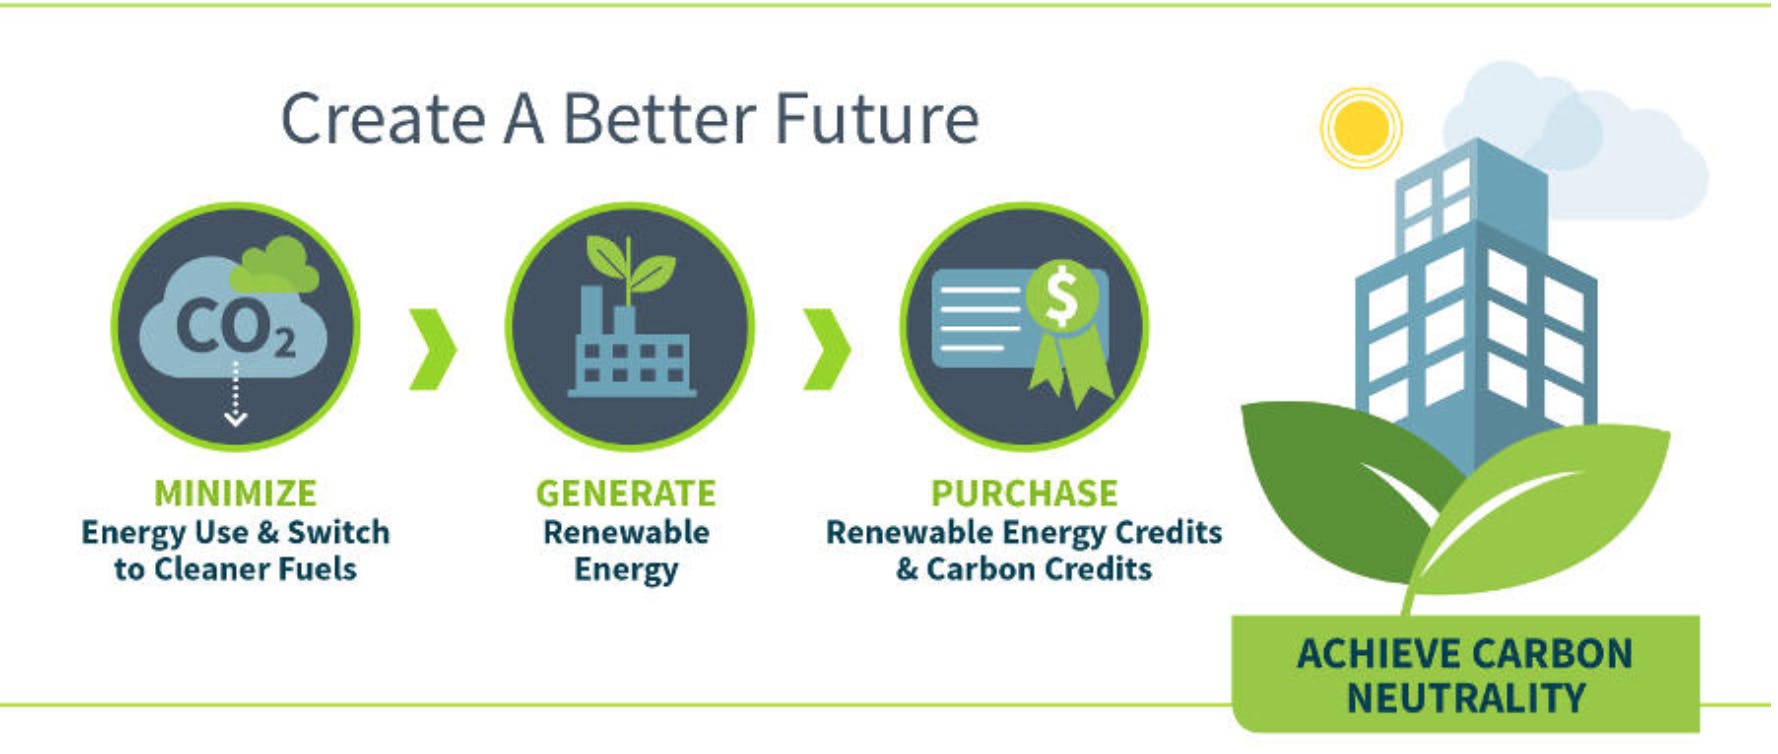 Create a better Future, for a carbon-neutral world.